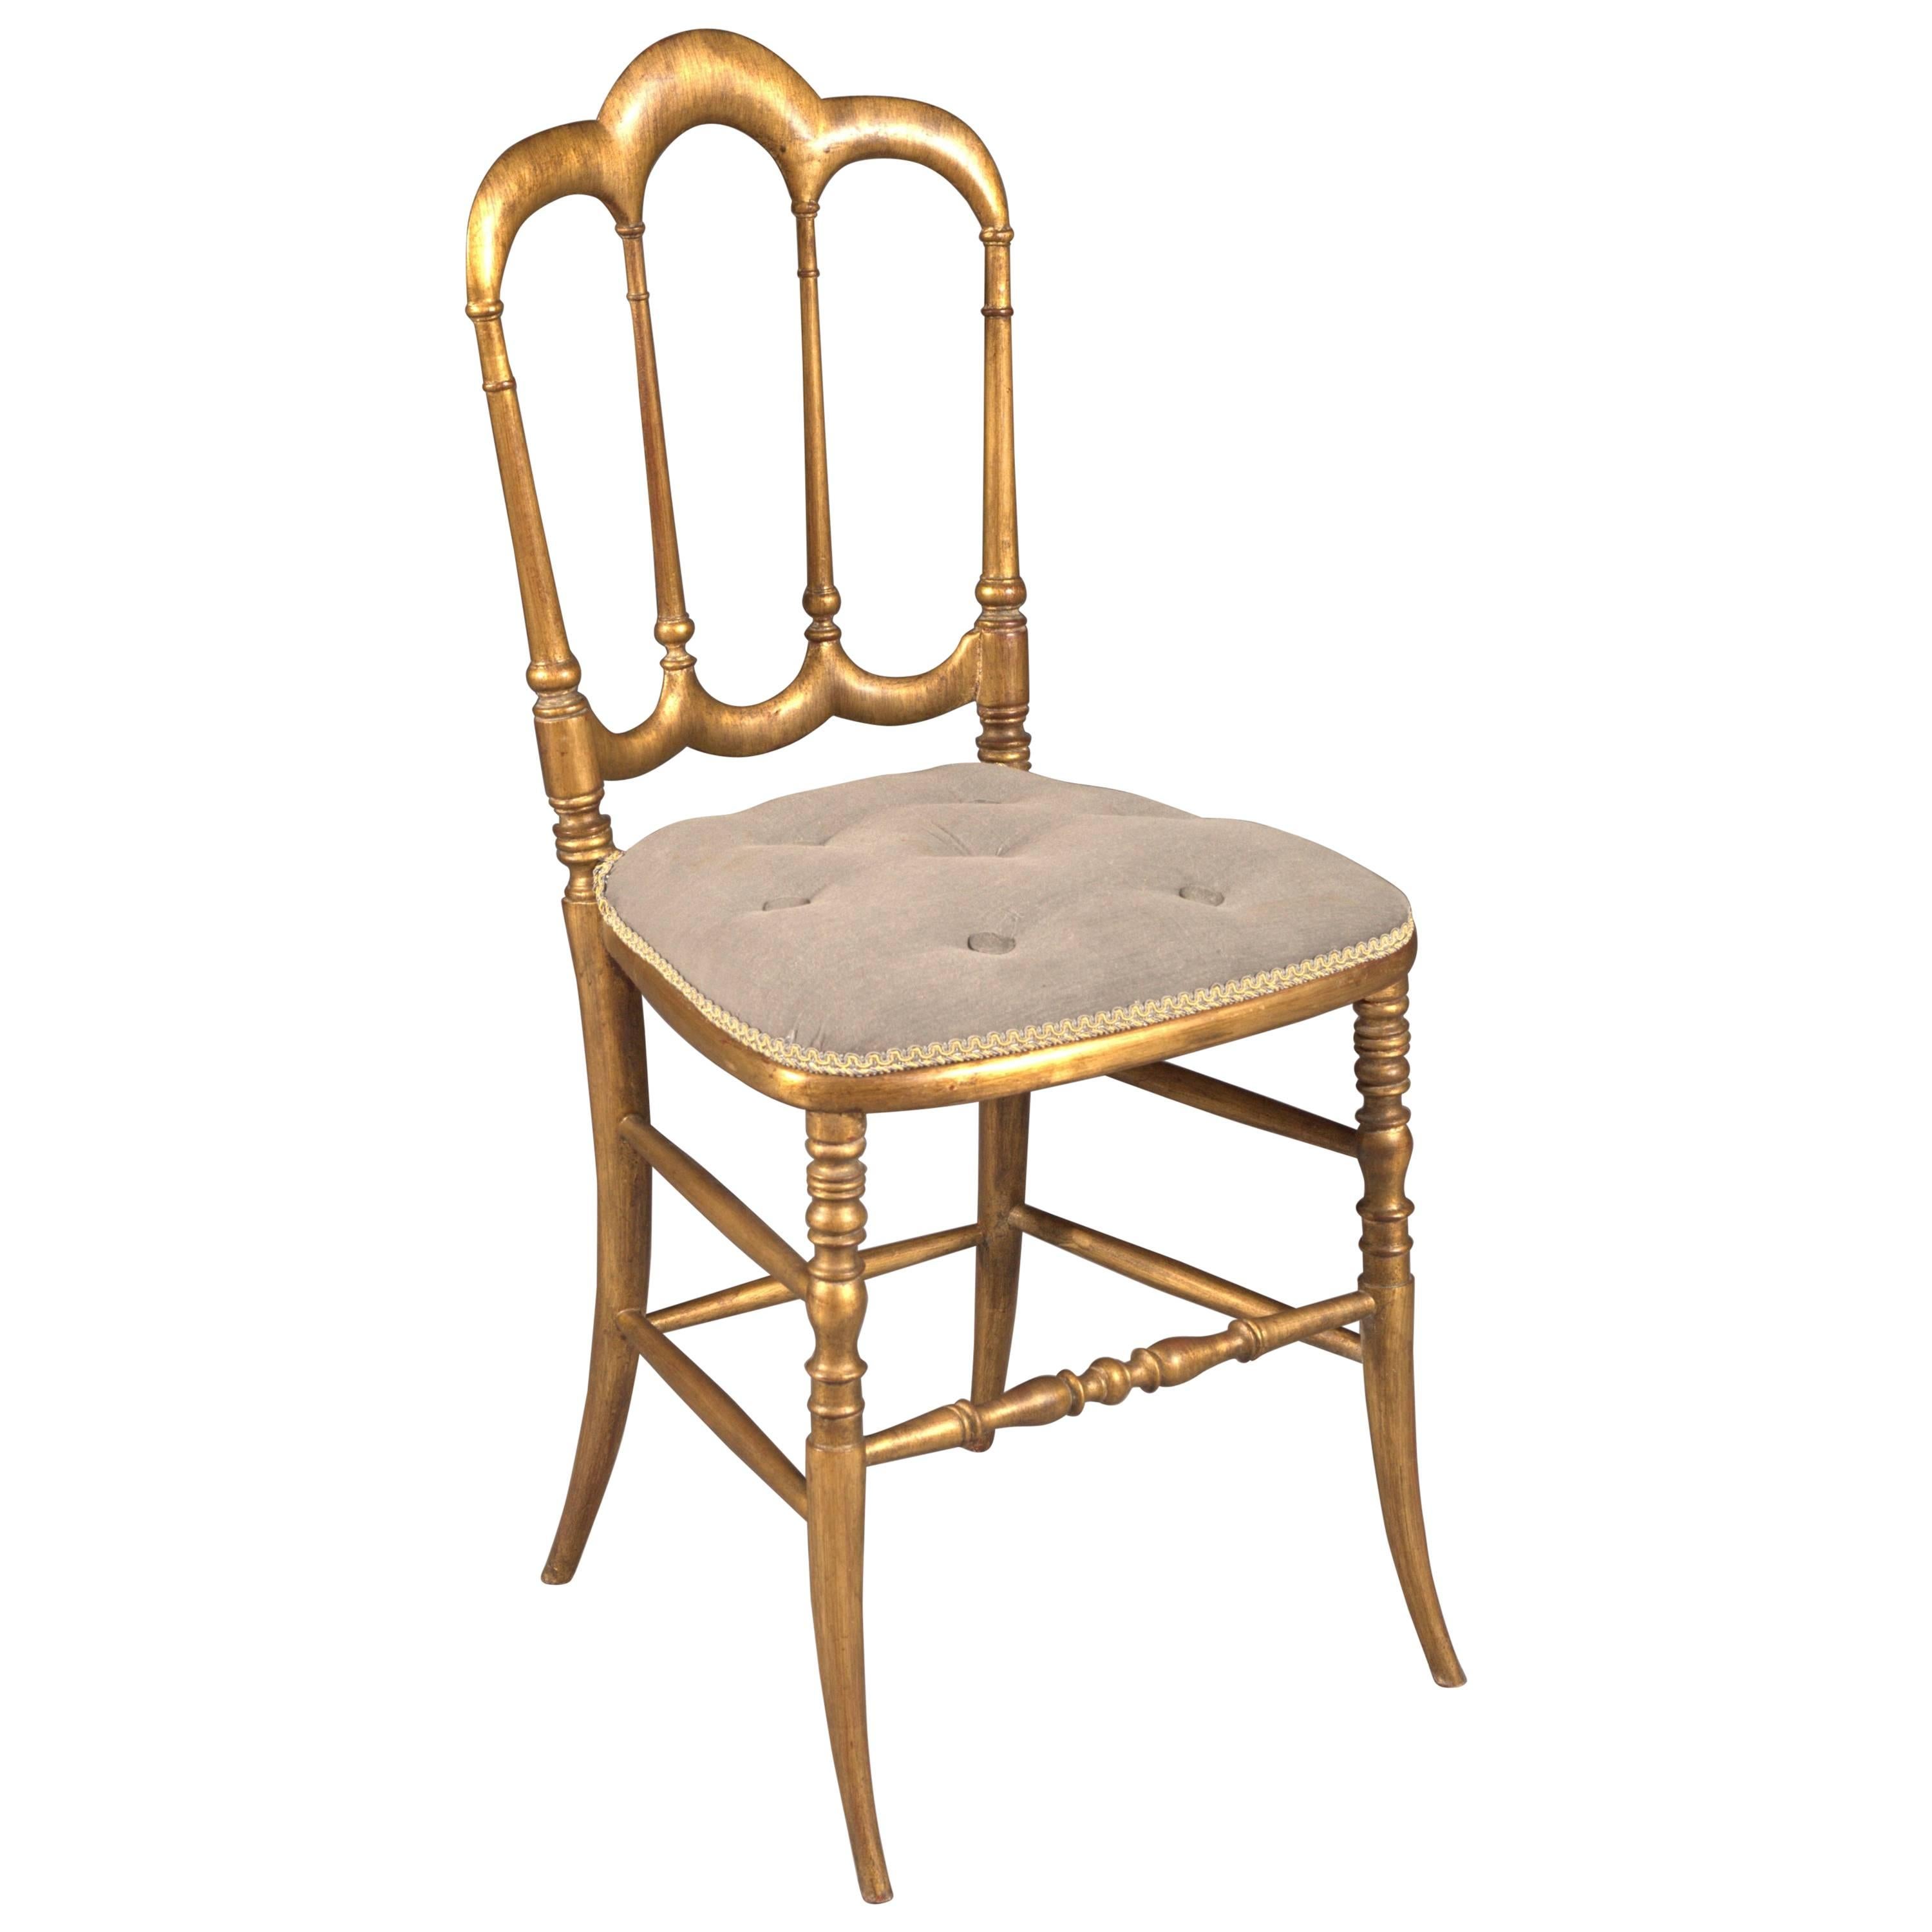 Delicate Chair in the Style of the 19th Century